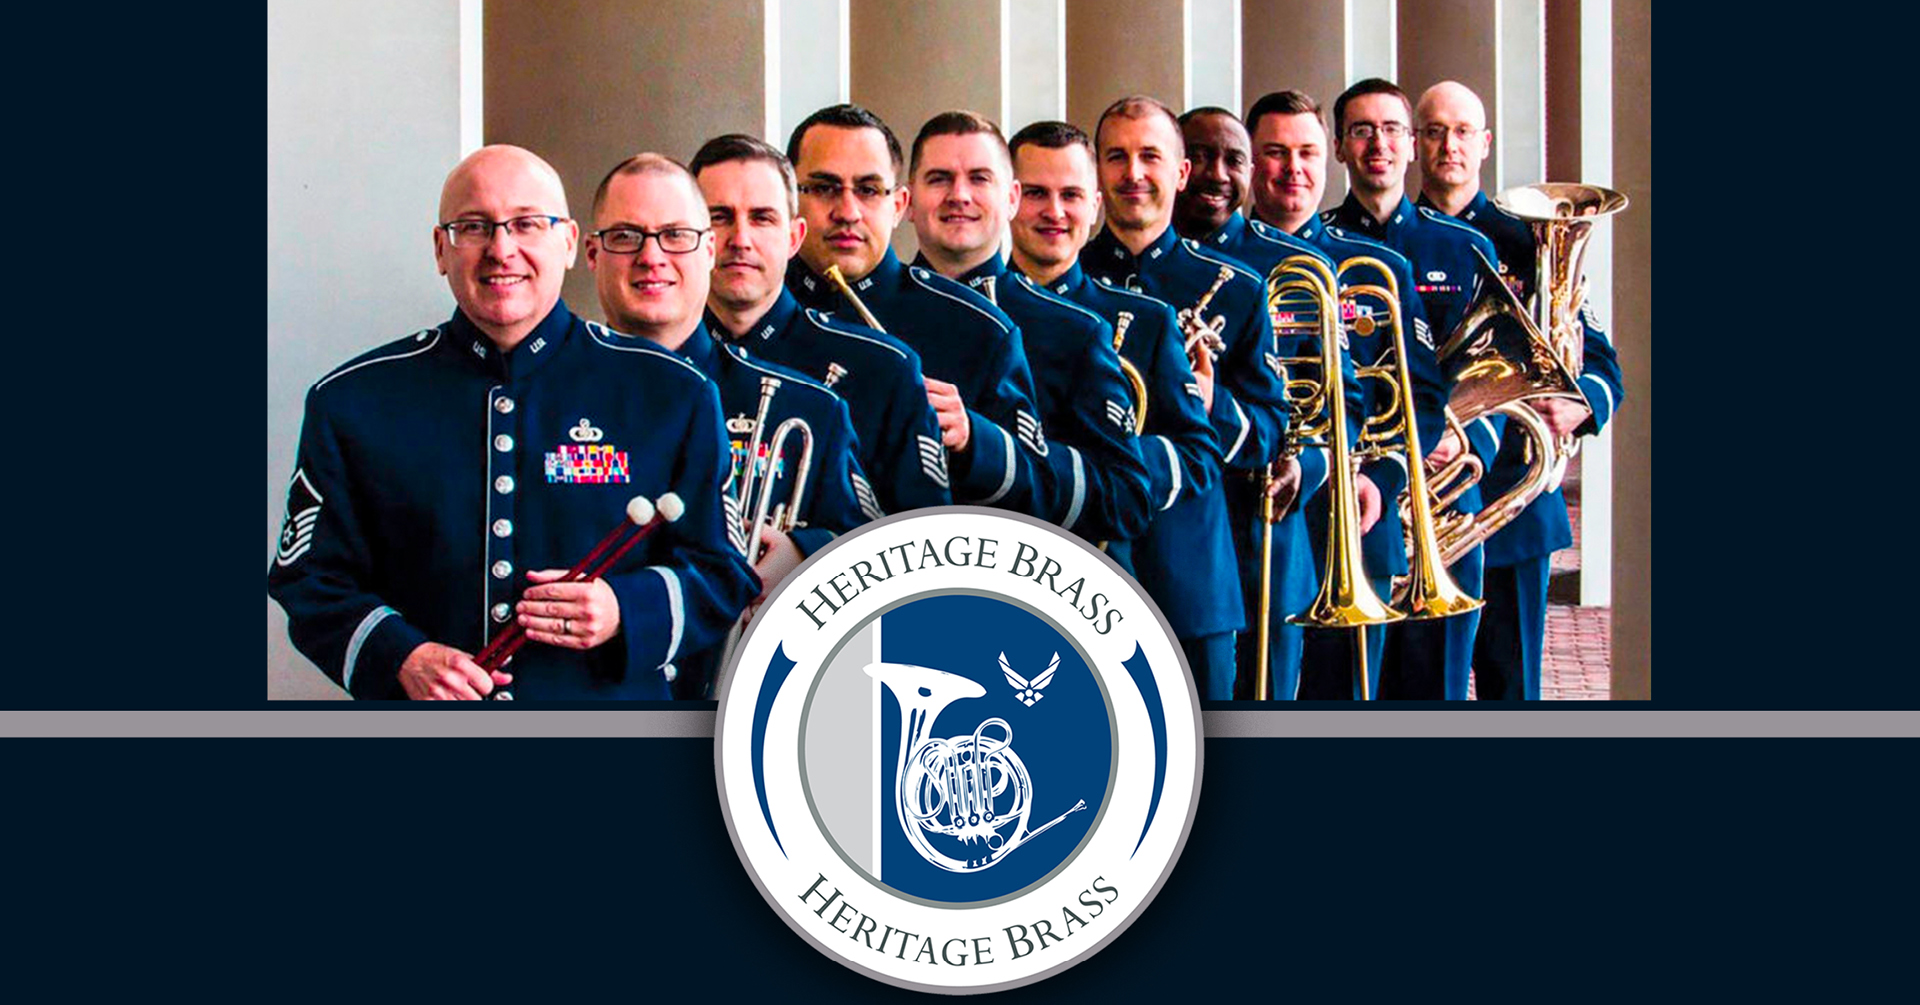 USAF Heritage Brass - The Colonial Theatre Pittsfield MA